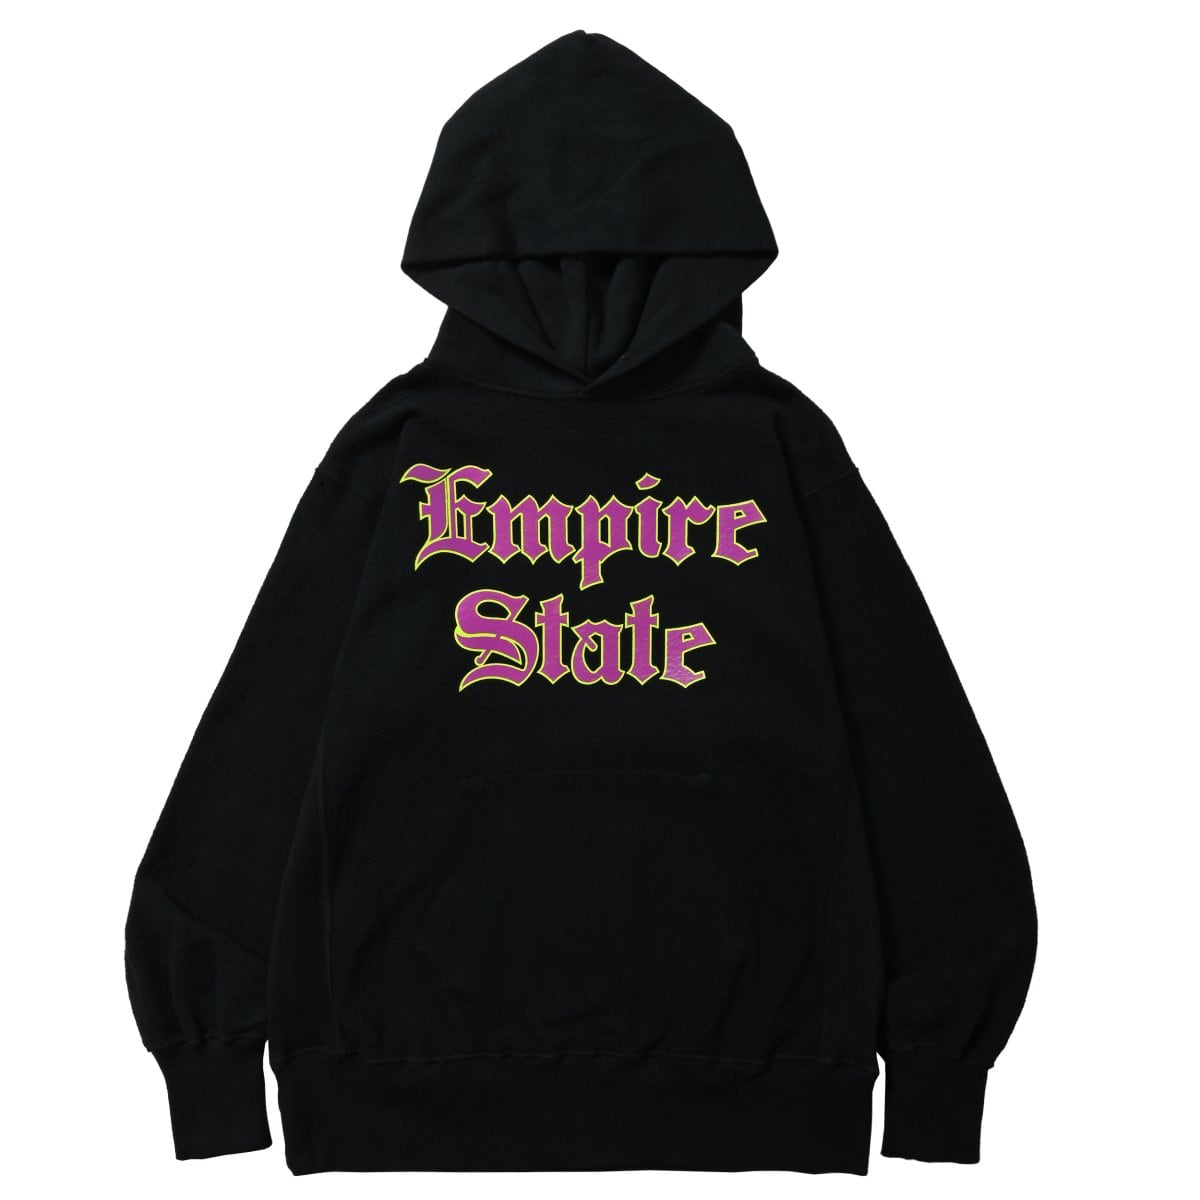 BACKSIDE OF EMPIRE STATE HOODIE | NEXUSVII. powered by BASE